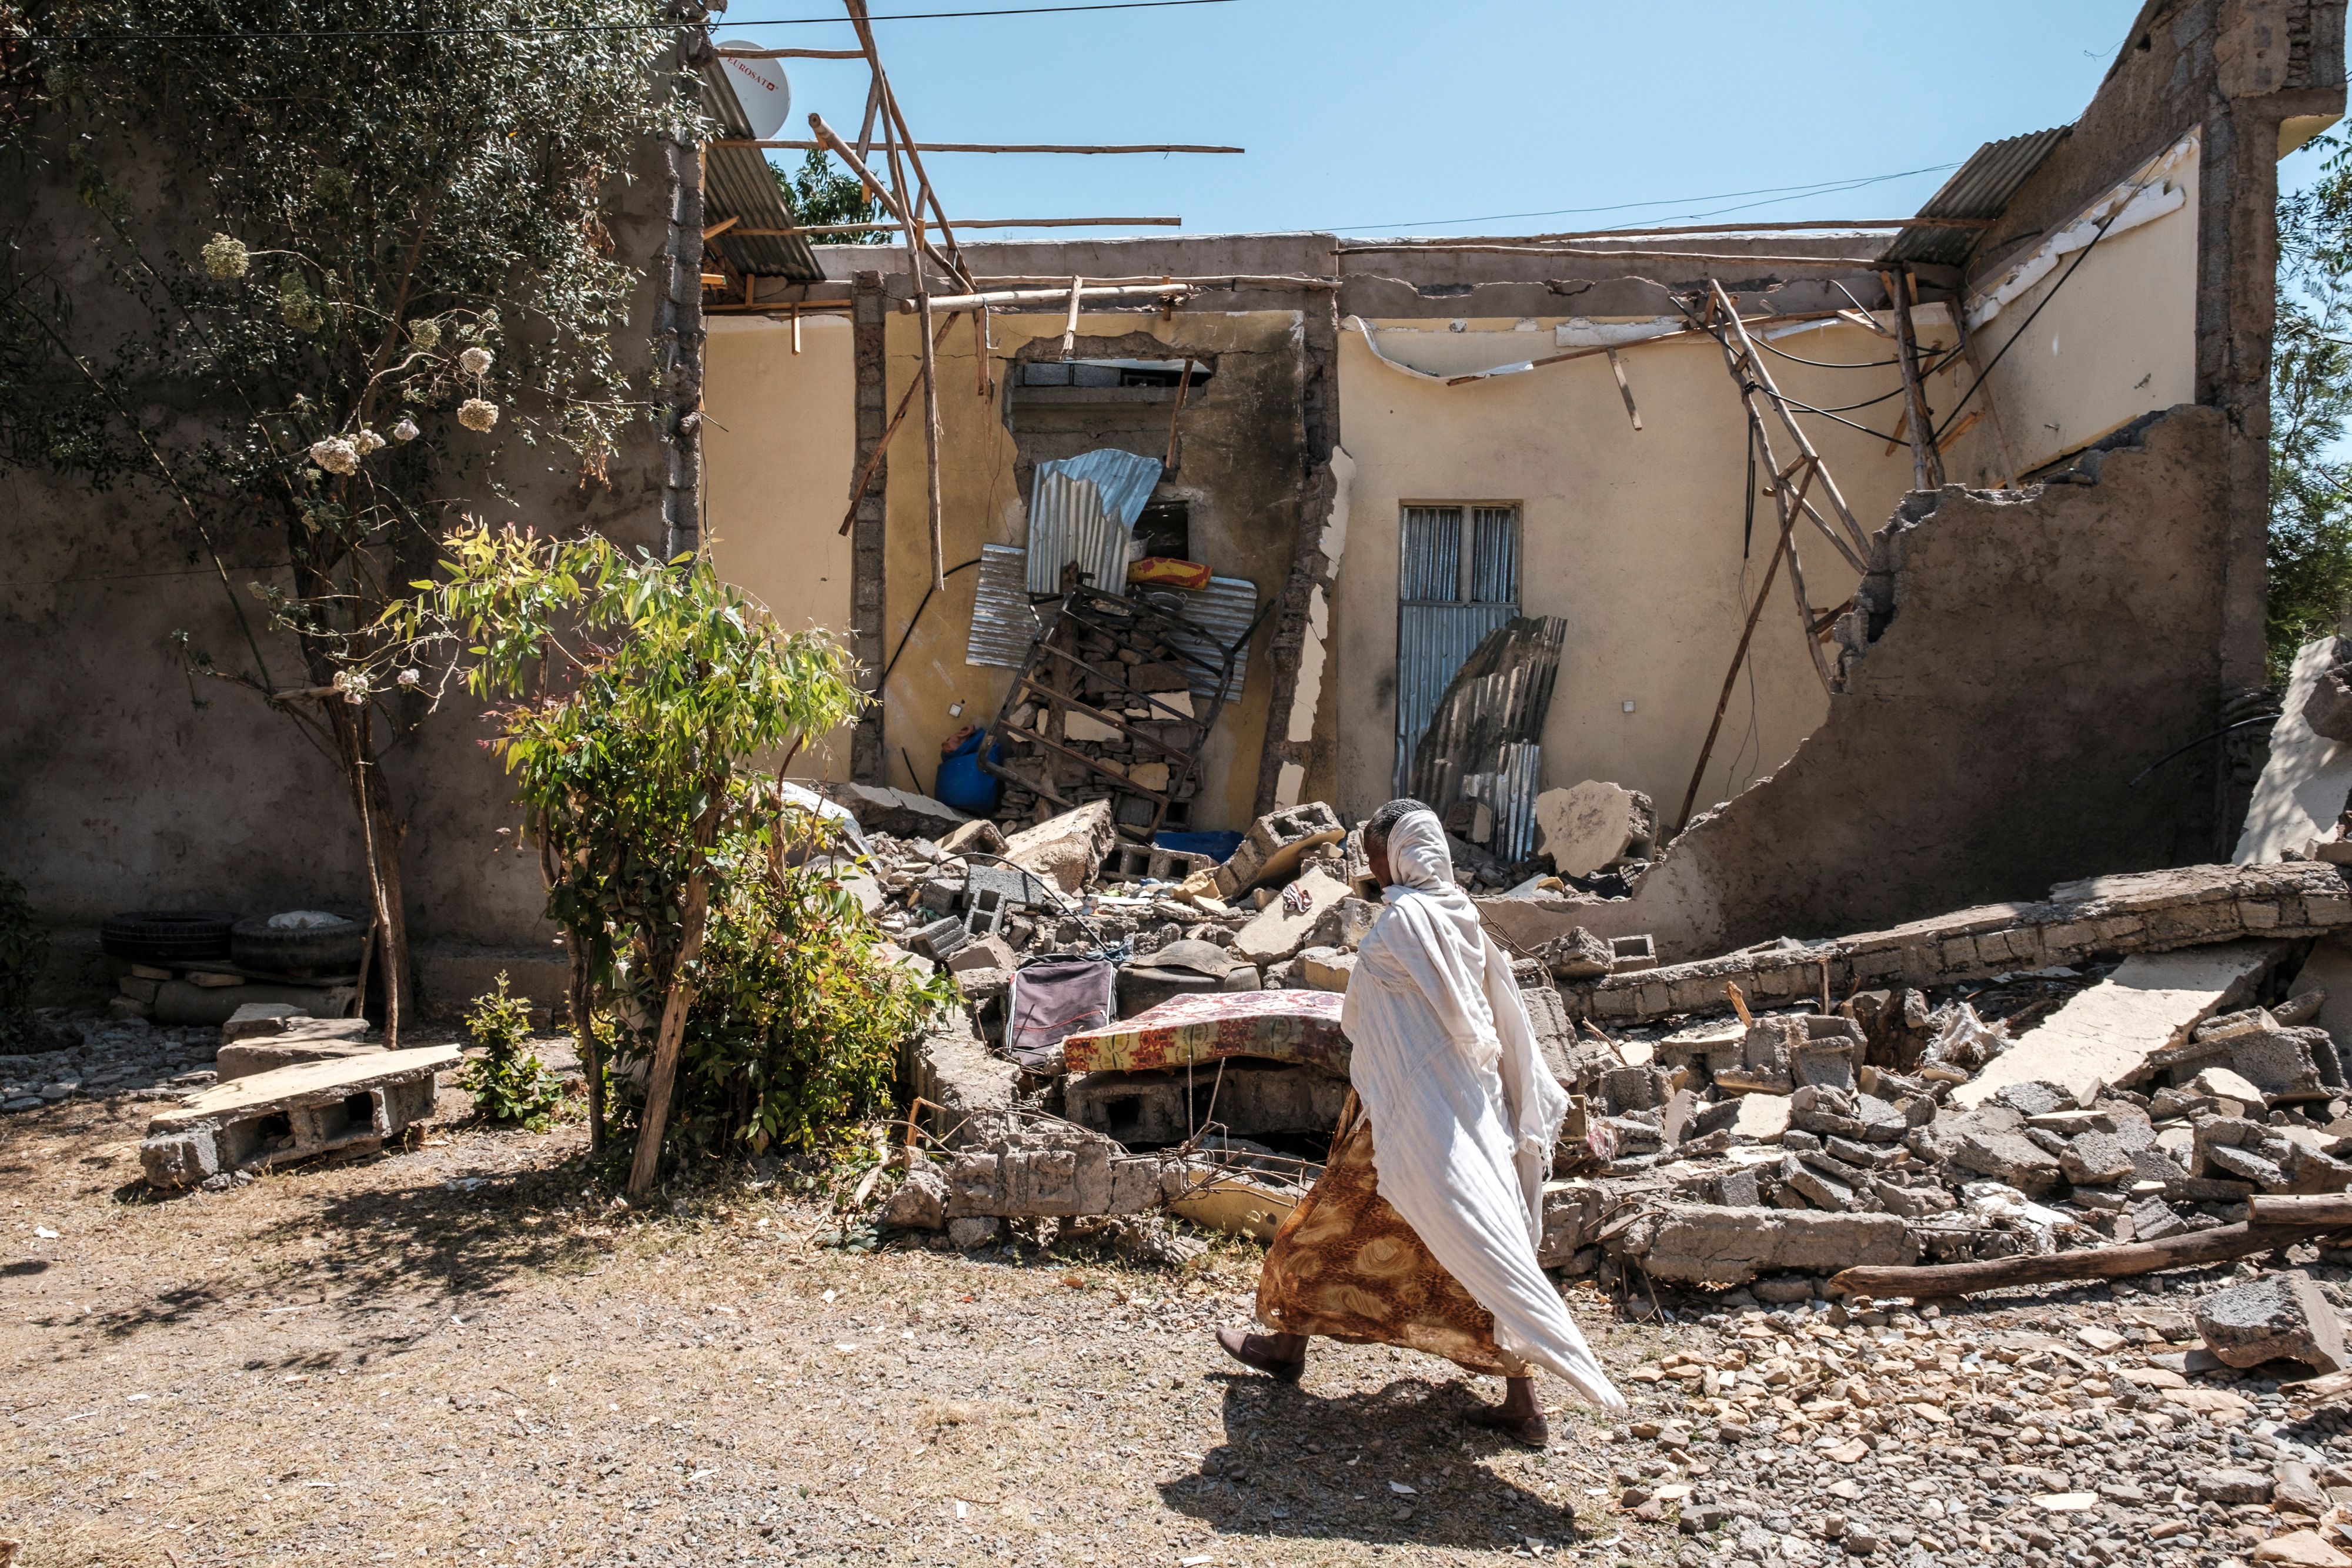 A woman walks in front of a damaged house which was shelled as federal-aligned forces entered the city, in Wukro, north of Mekele